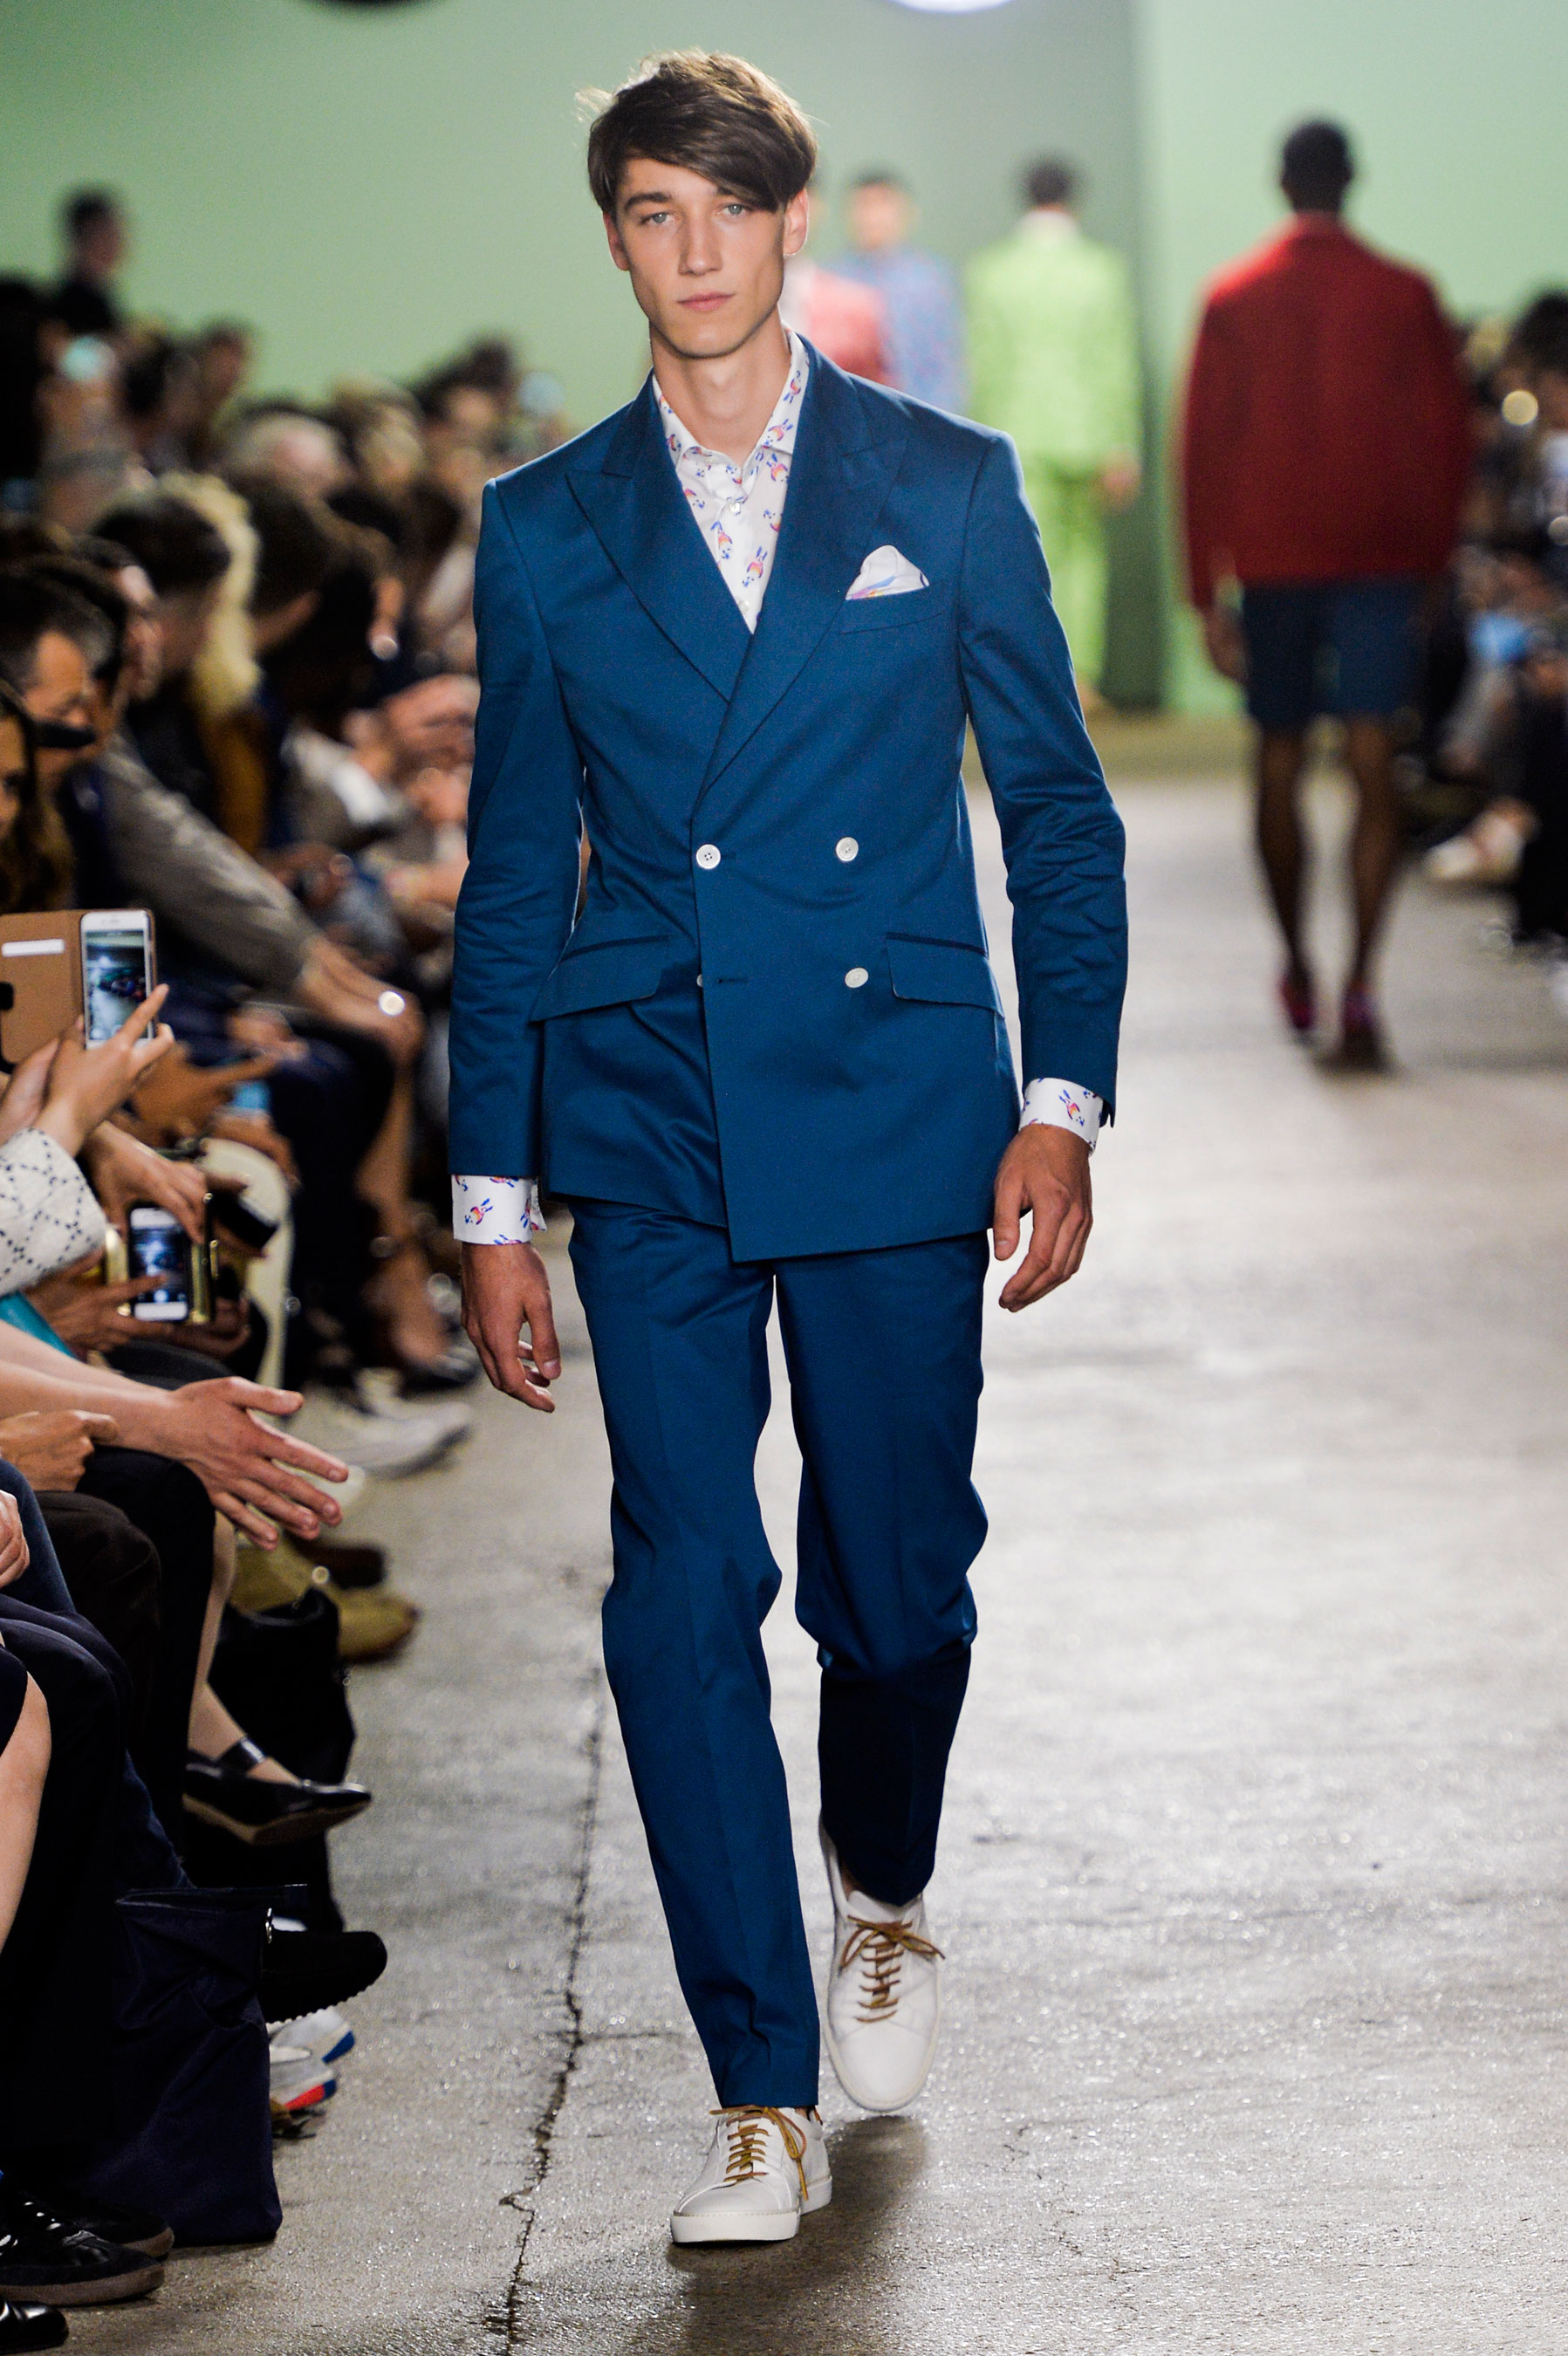 Richard James Spring/Summer 2016 | London Collections: Men | The ...